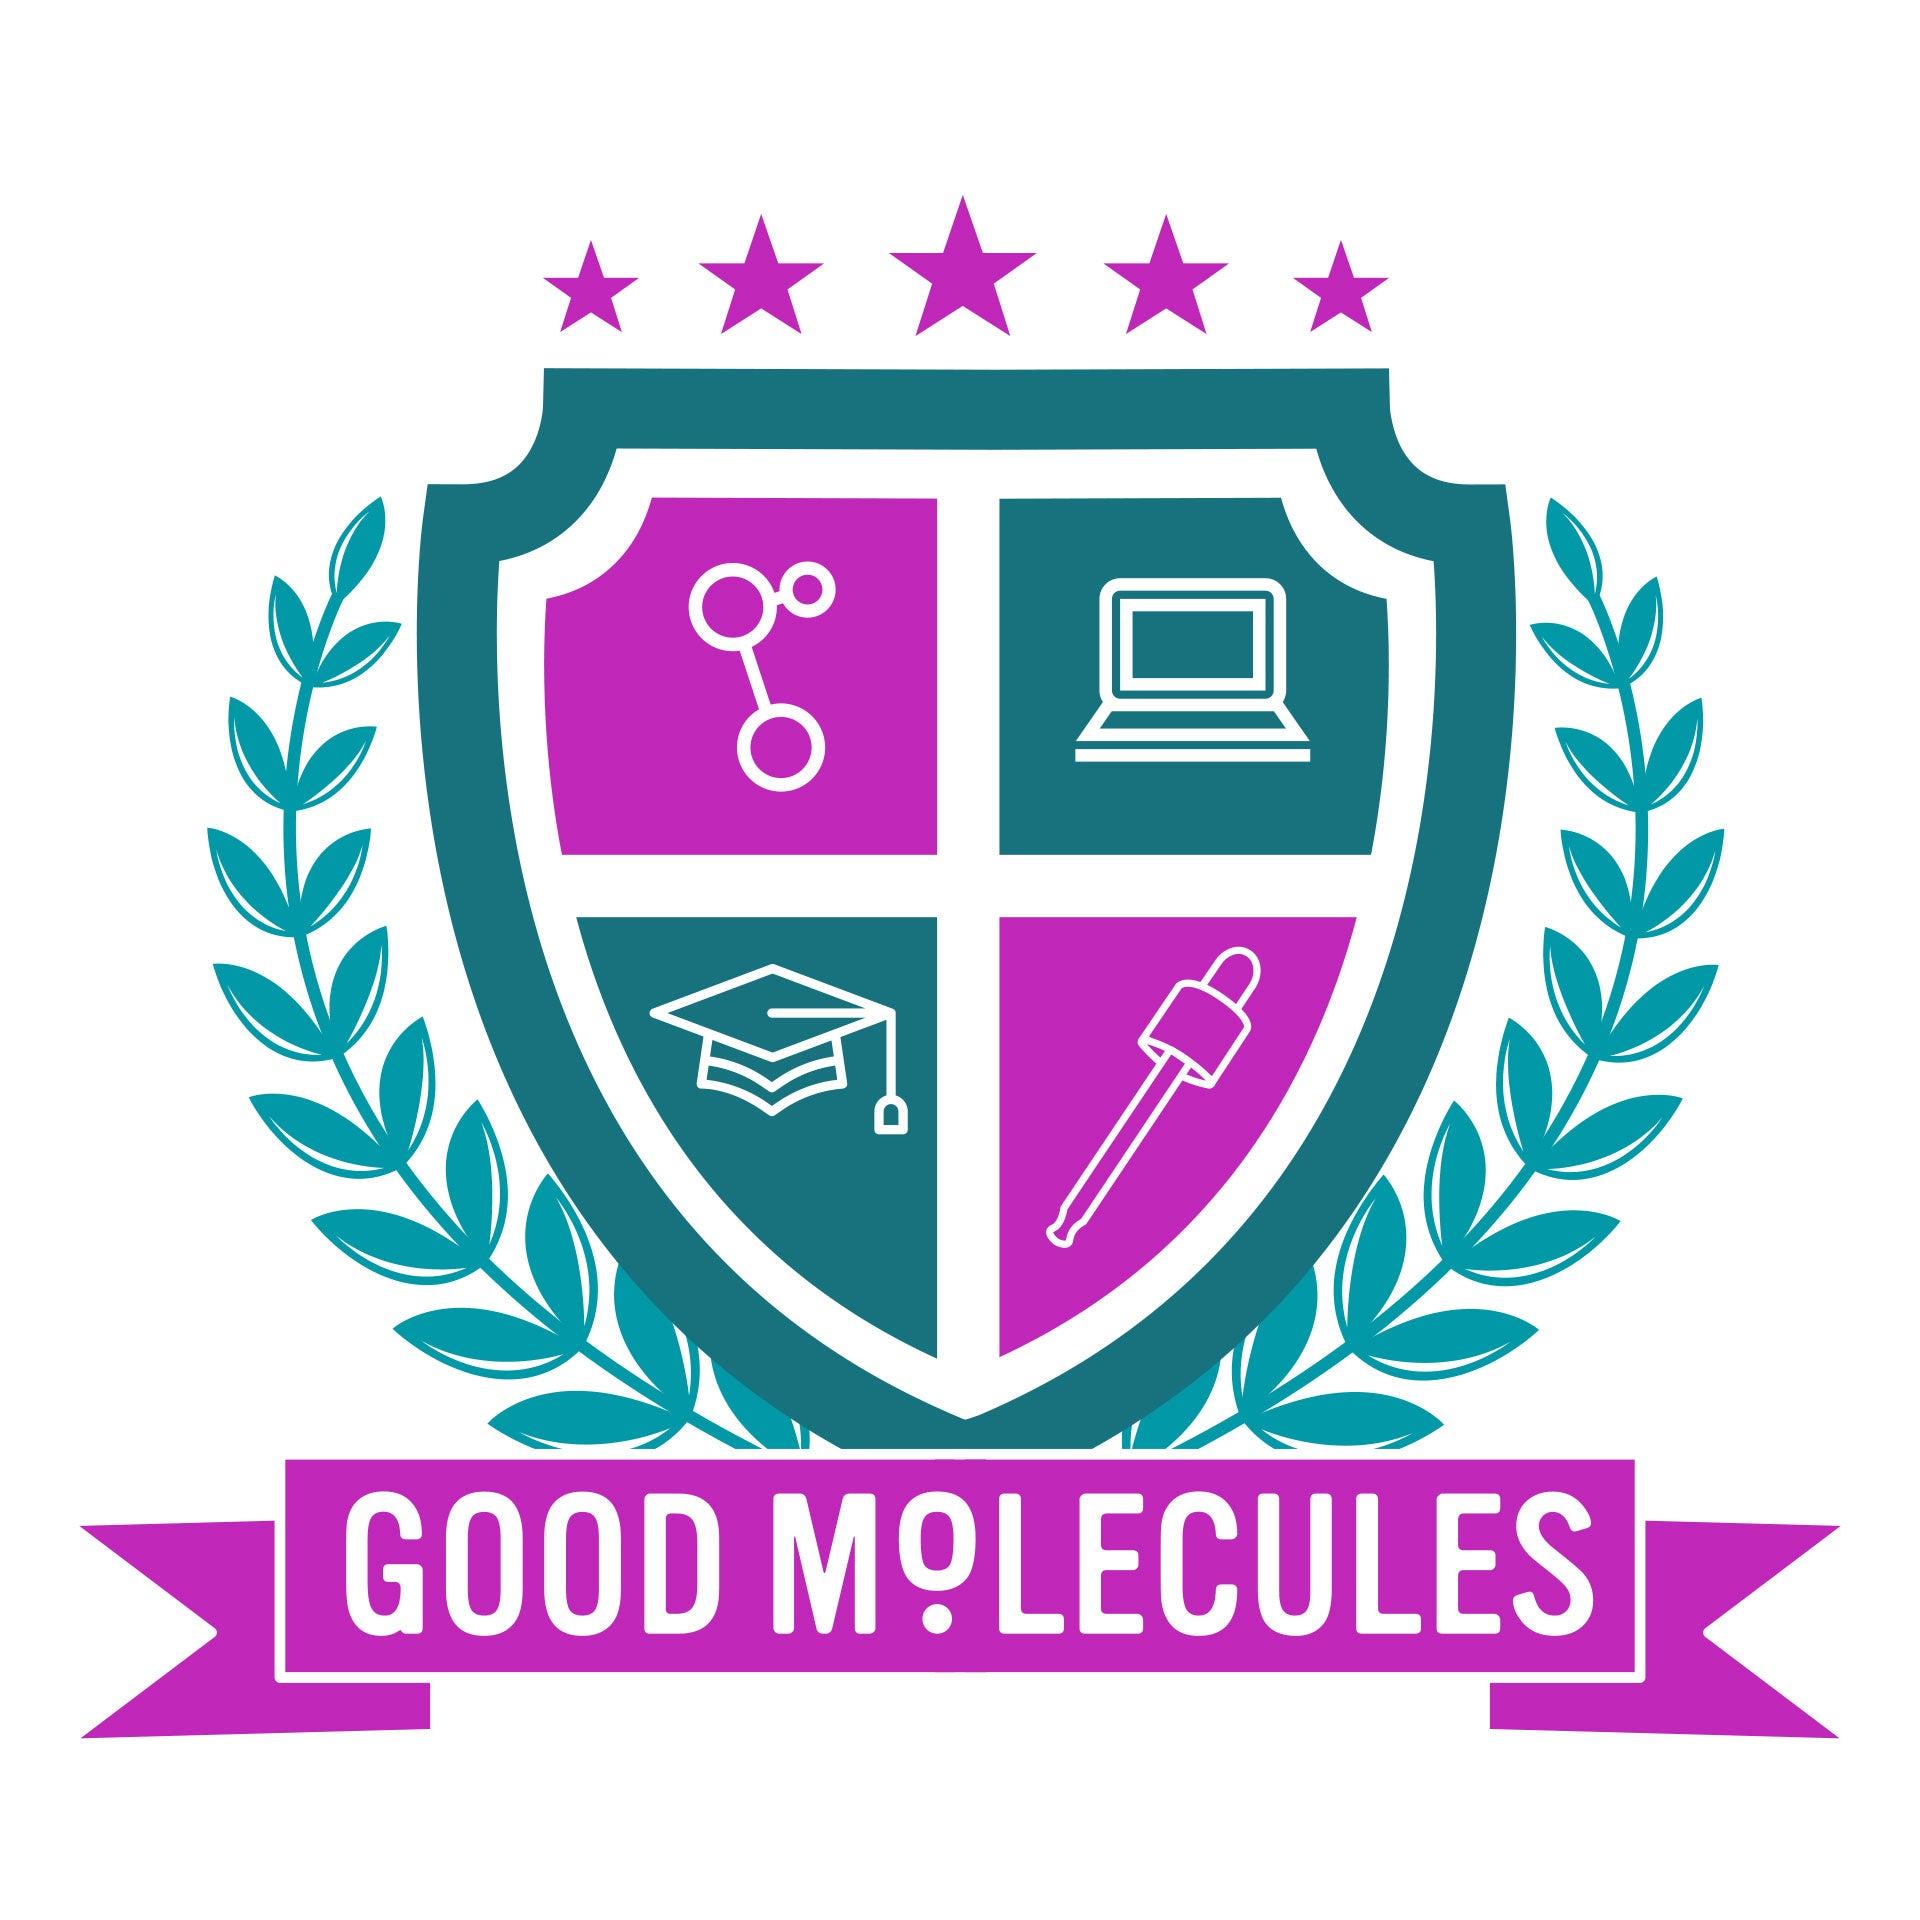 Good Molecules is coming to Texas A&M University!